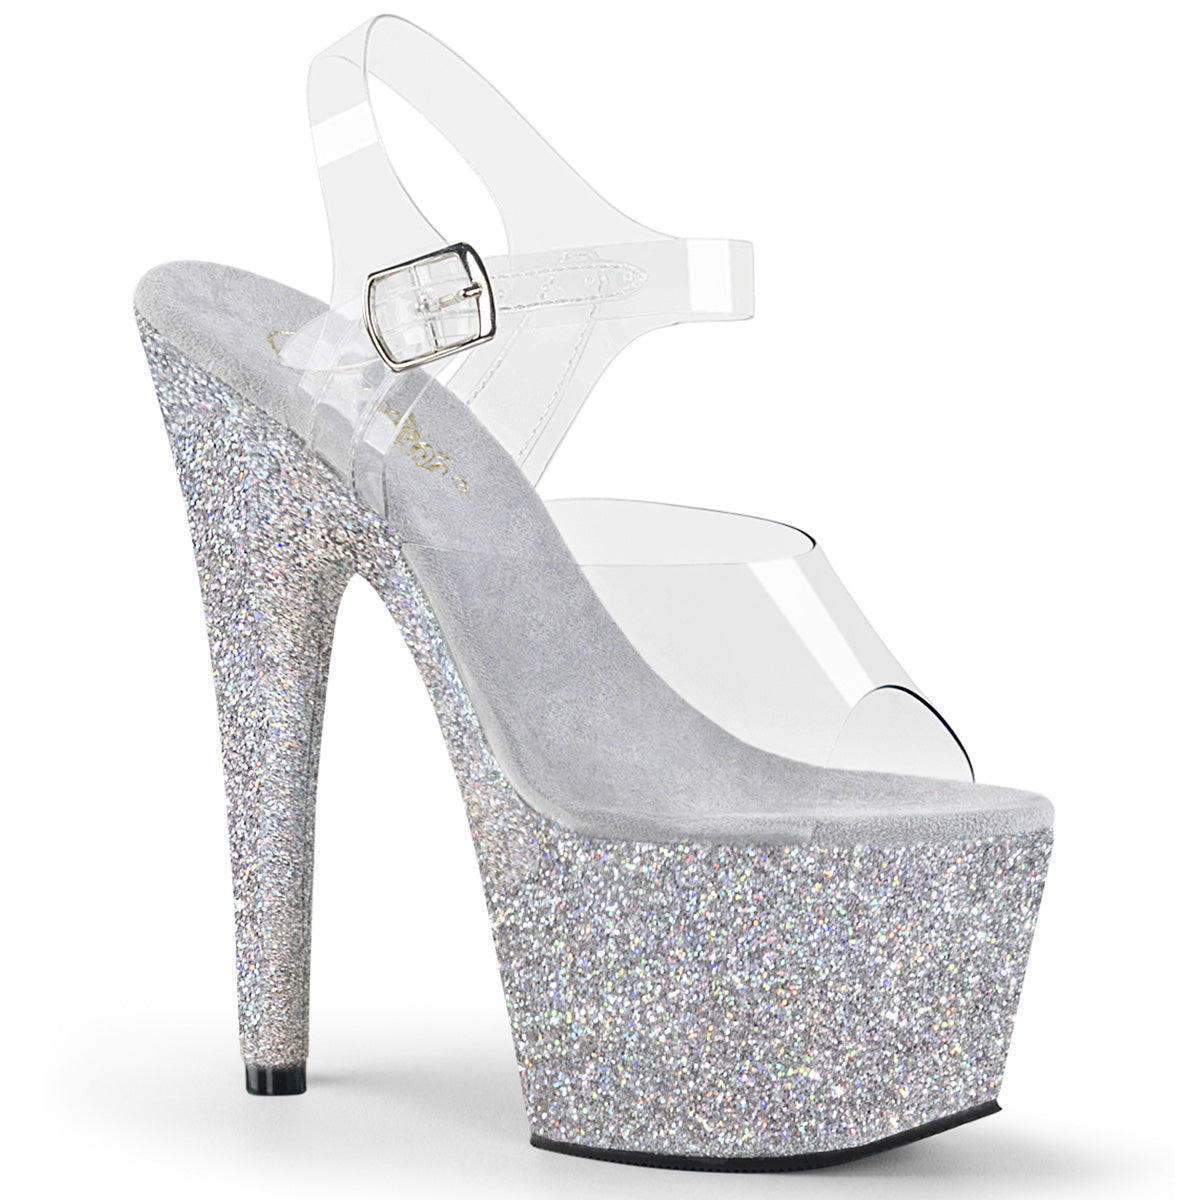 Adore-708hmg Sexy 7 "Heel Clear Silver Silver Perling Pole